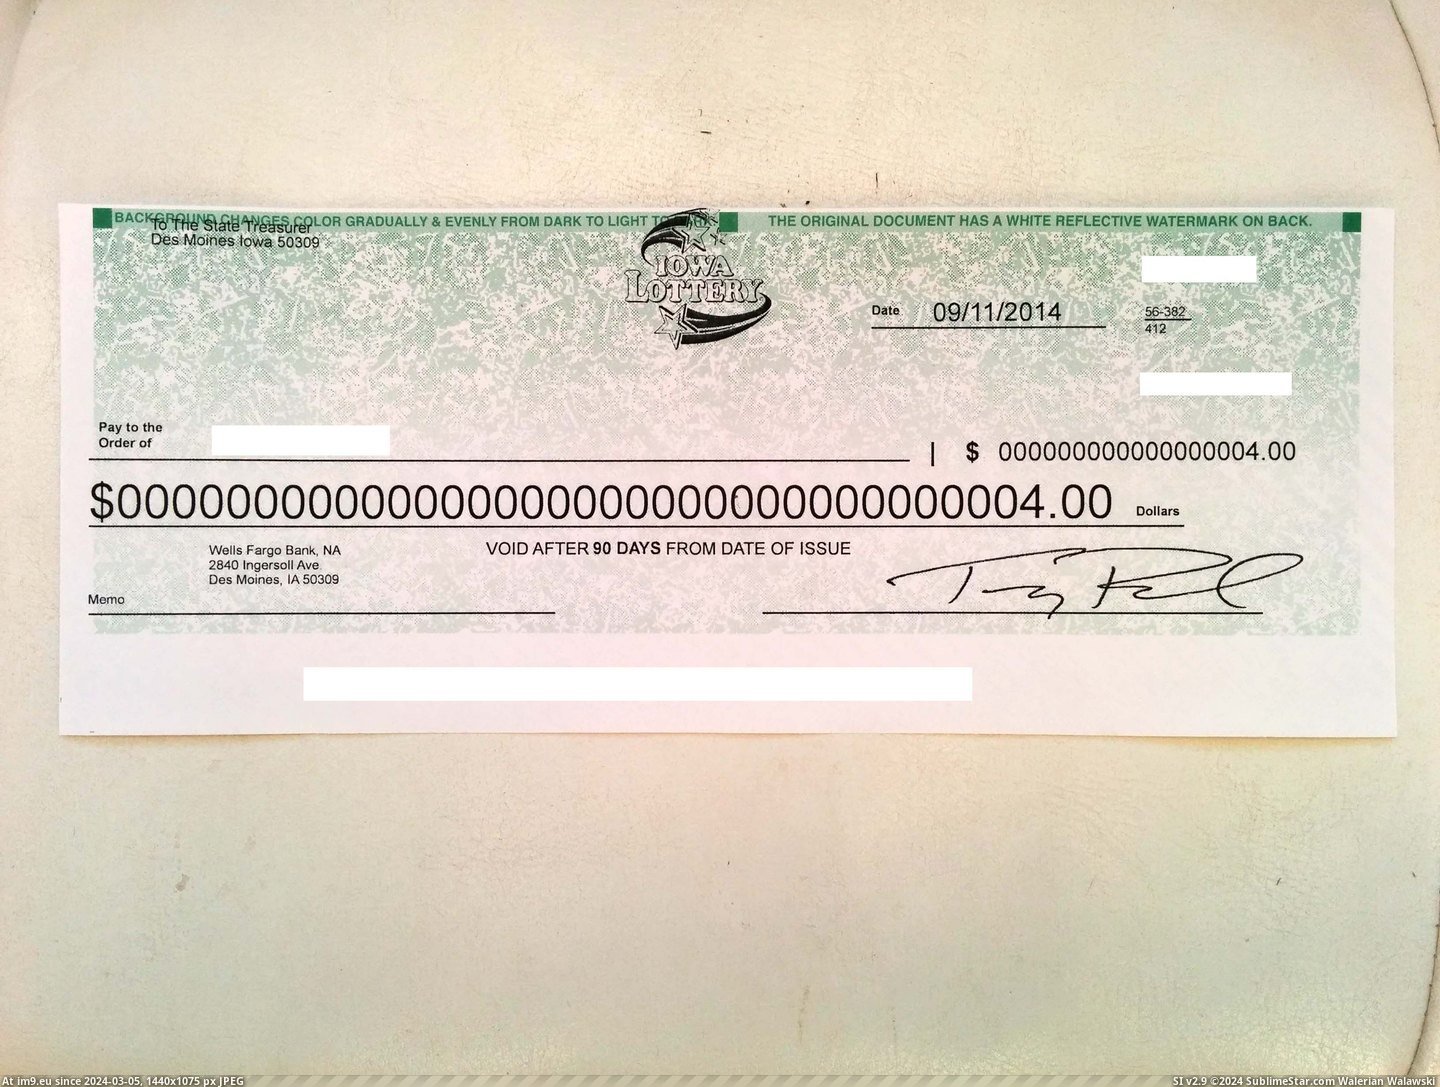 #Check #Won #Biztches #Bet #Lottery [Pics] Just won the lottery biztches! Bet you've never seen so many 0's on a check! Pic. (Image of album My r/PICS favs))